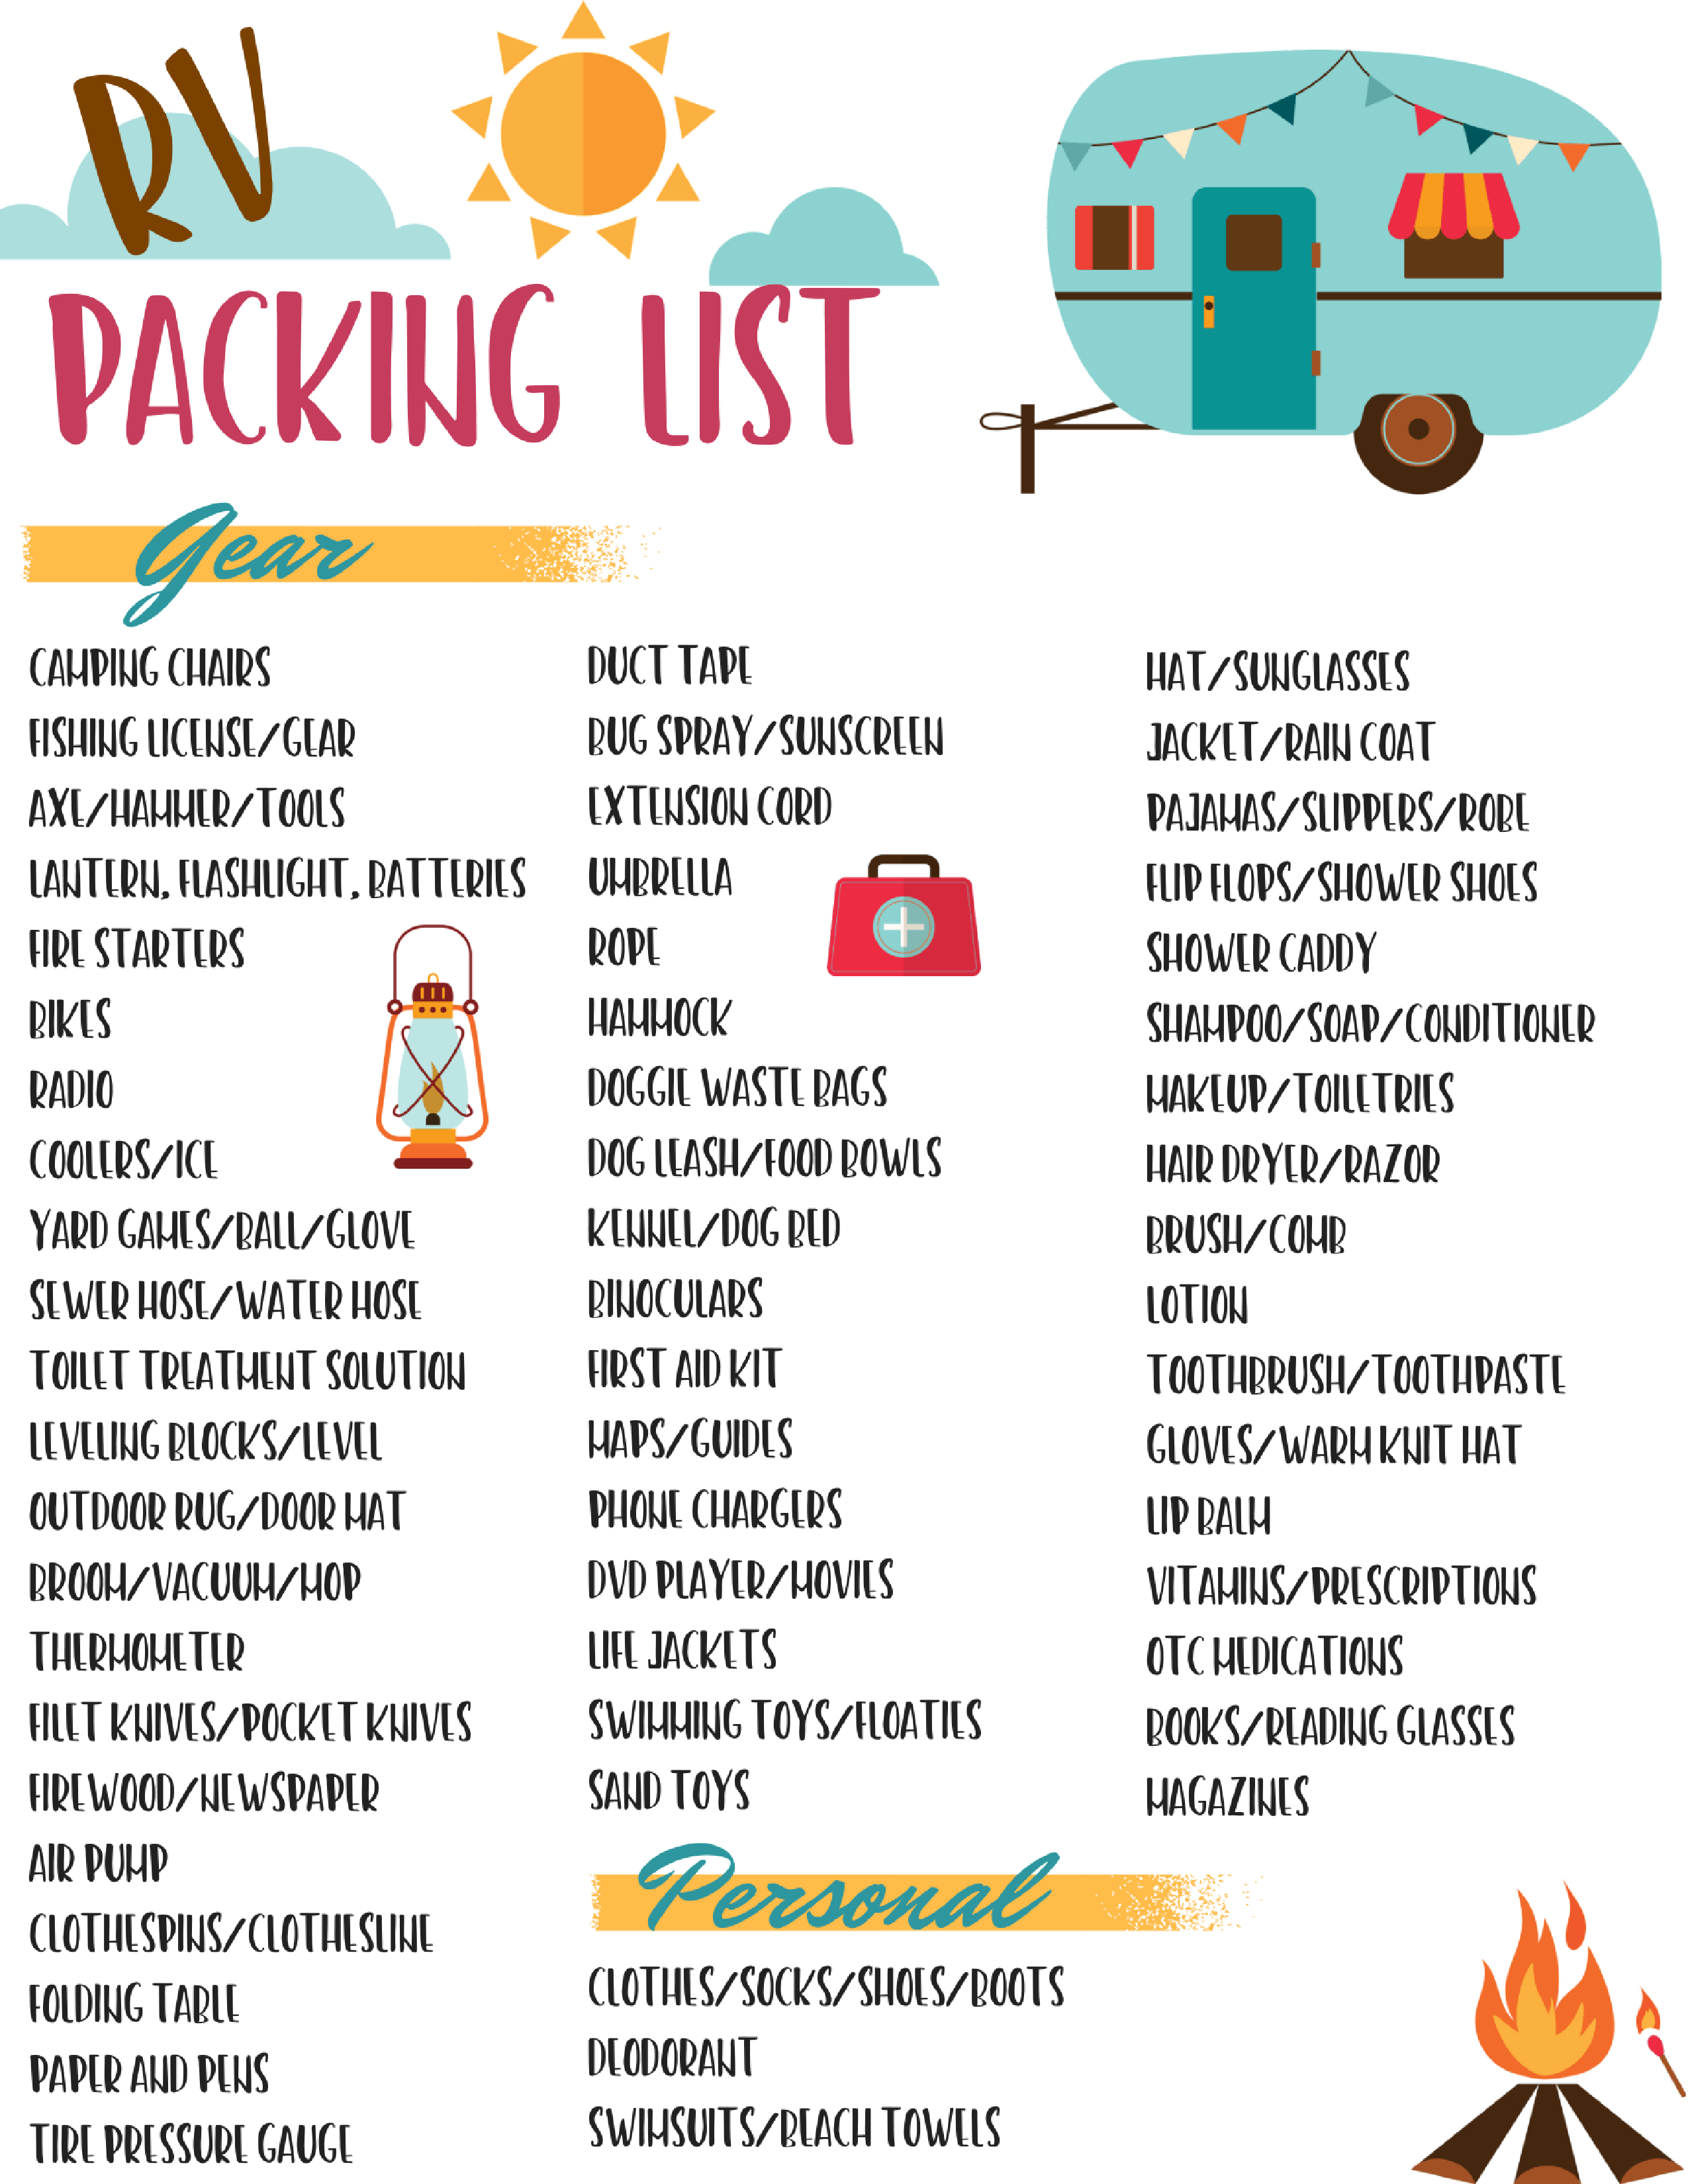 Free RV checklist printable packing list. Don't forget anything on your next camping trip in your travel trailer. This free printable camping list has everything covered!